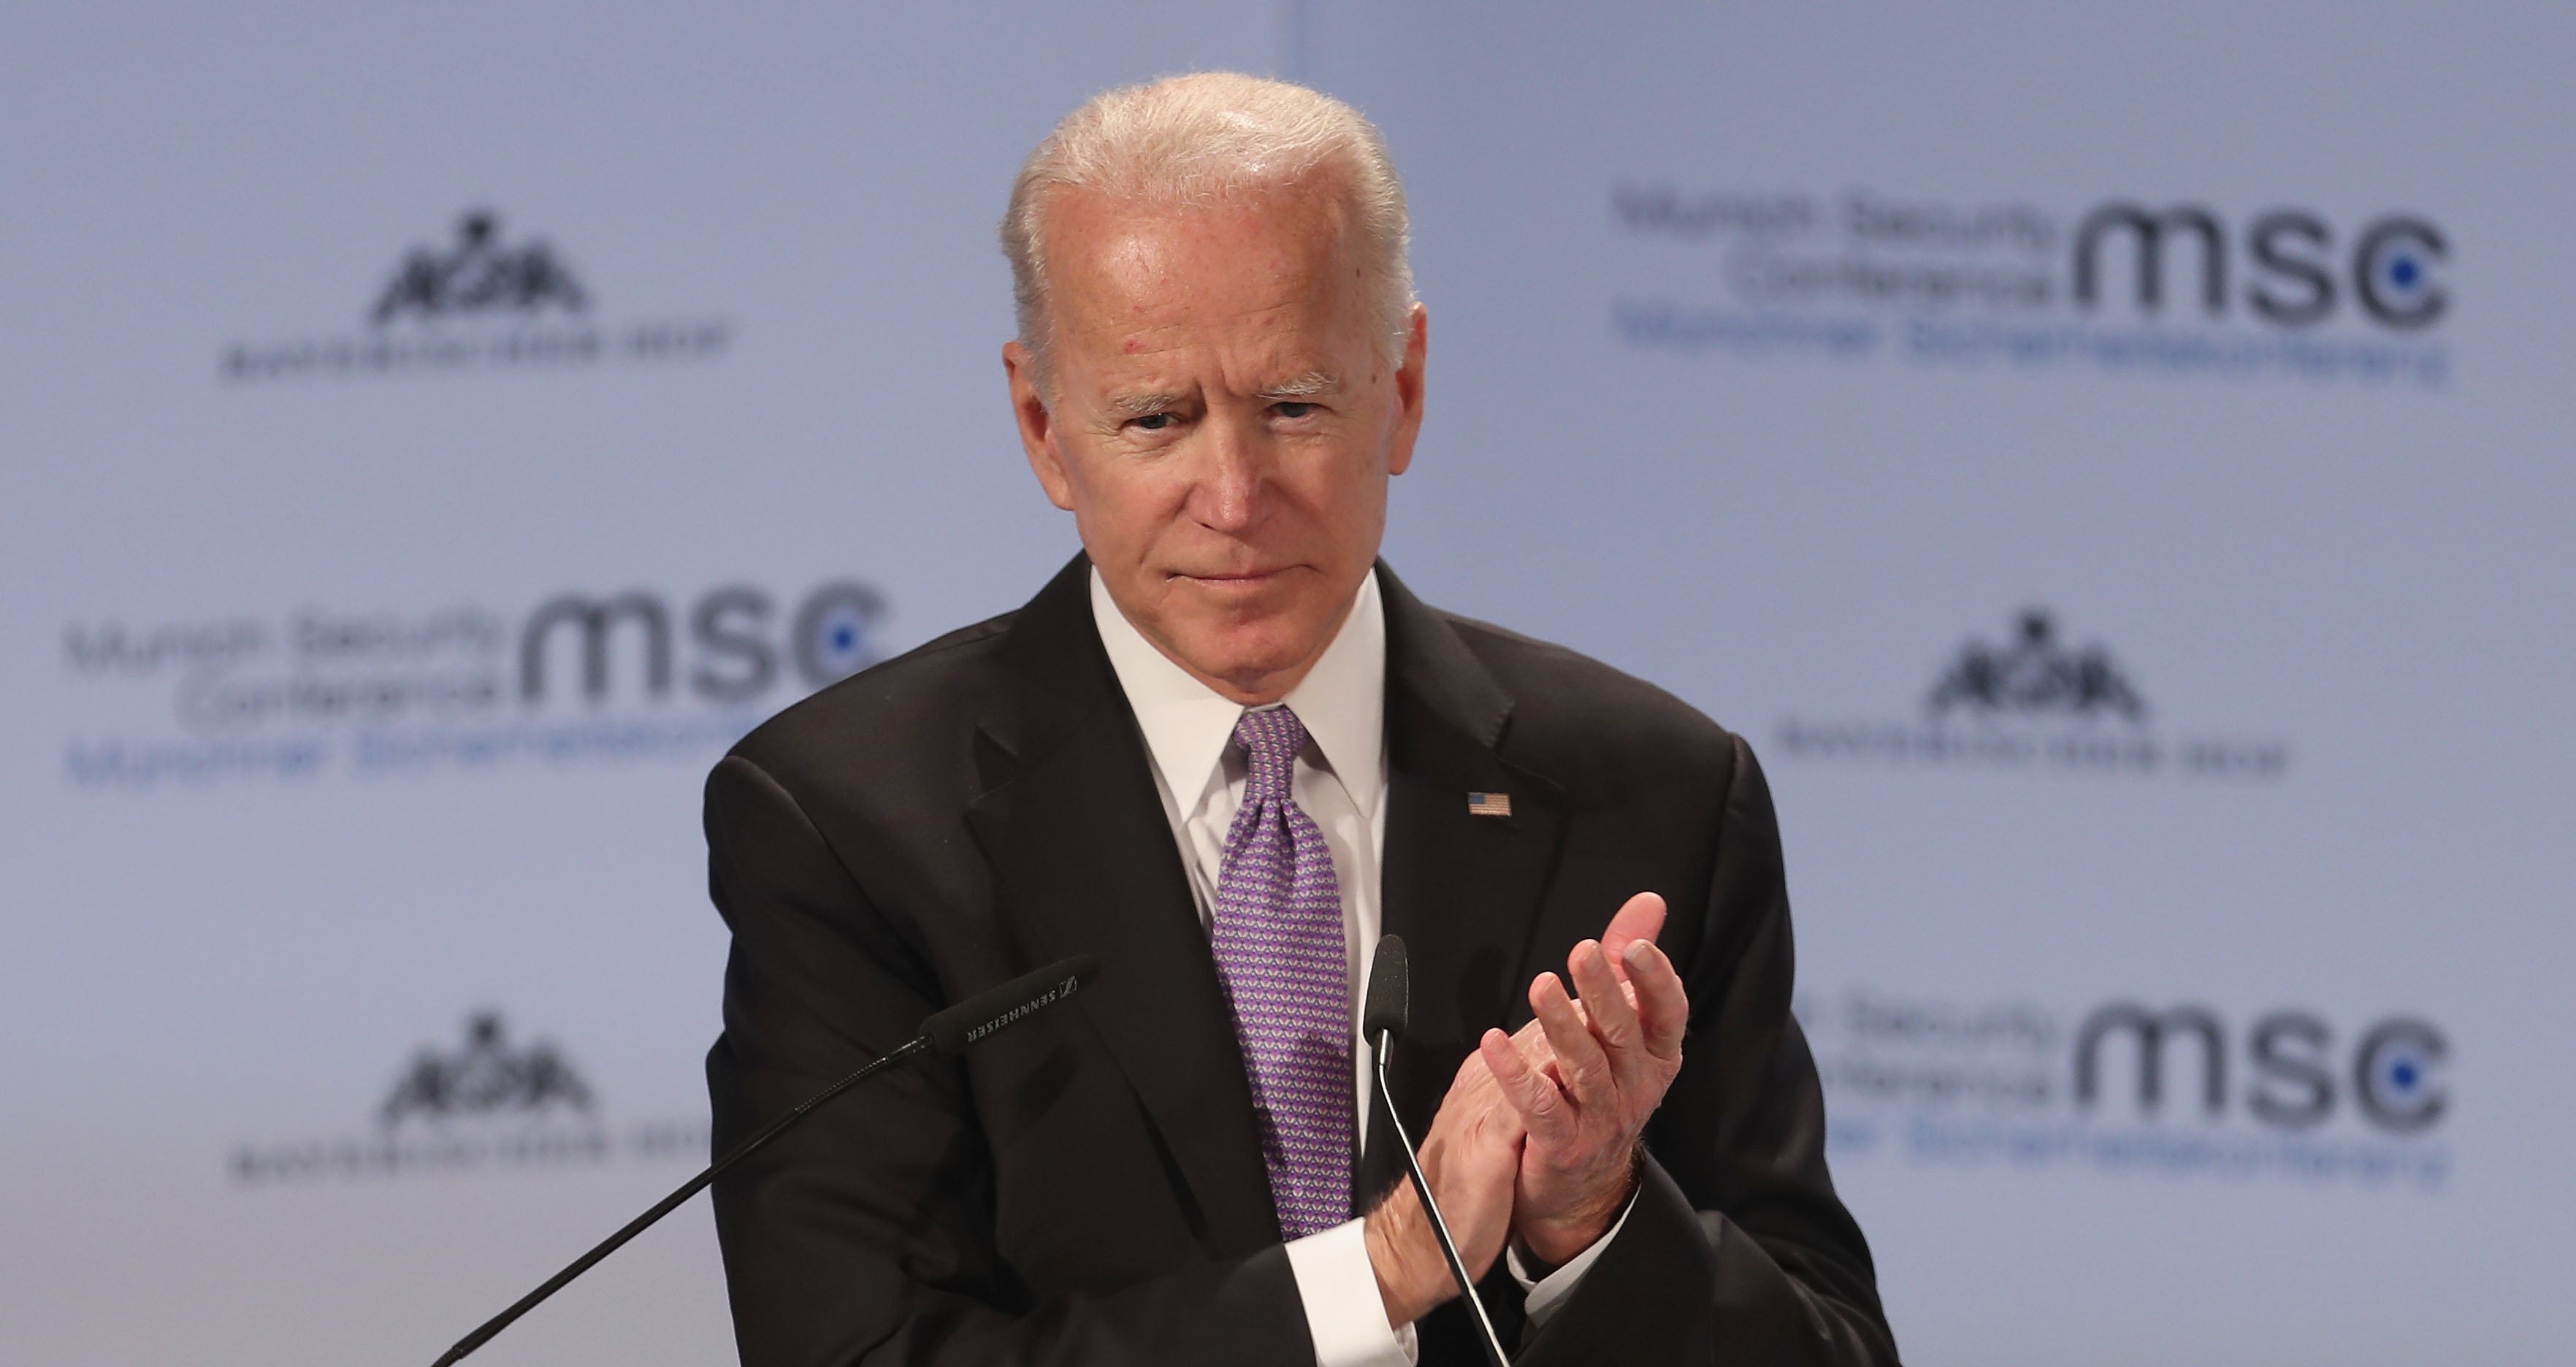 Joe Biden delivering a speech during the 55th Munich Security Conference in Munich, Germany | Photo: Getty Images